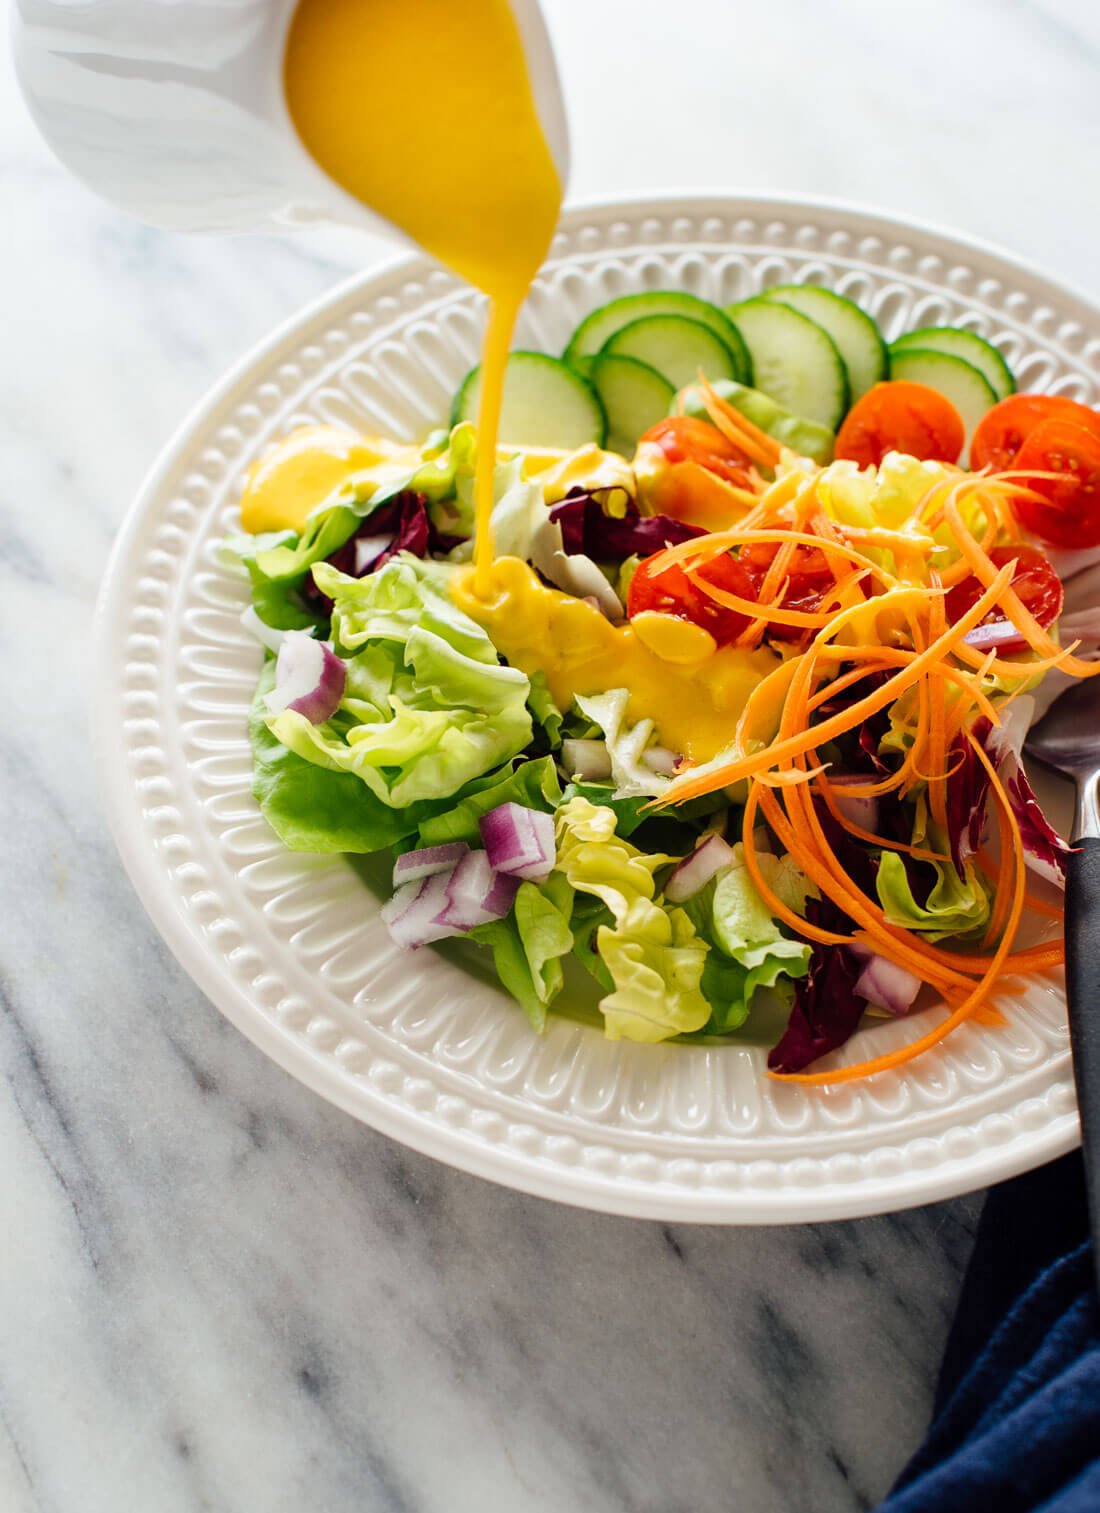 This carrot-ginger salad dressing recipe tastes remarkably fresh, creamy and light. It would pair nicely with other recipes with Asian flavors. Delicious!